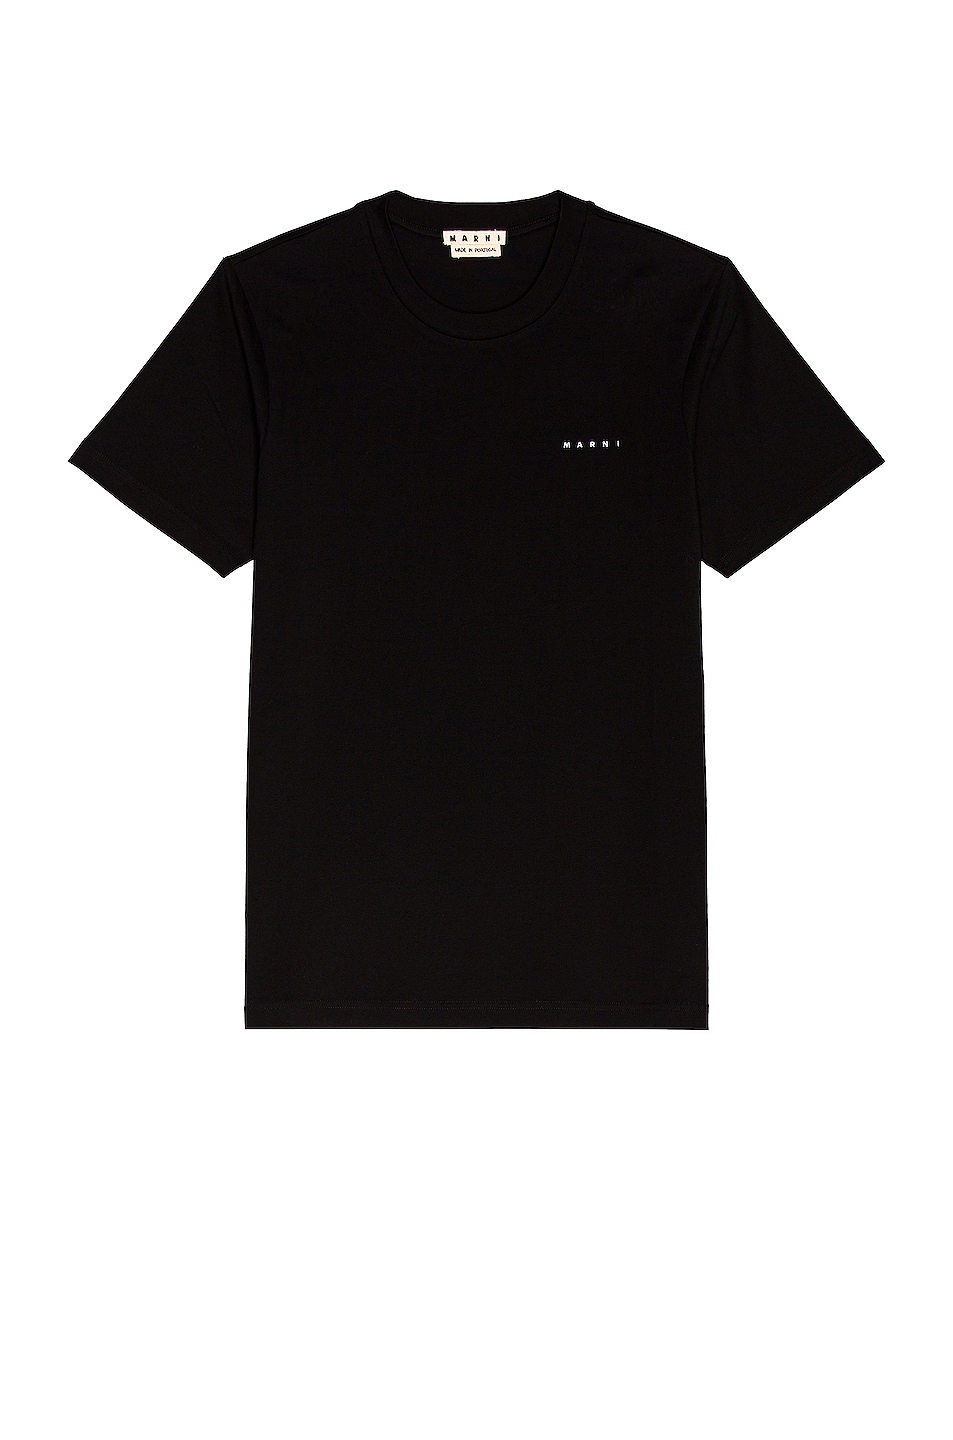 Image 1 of Marni Embroidered T-Shirt in Black